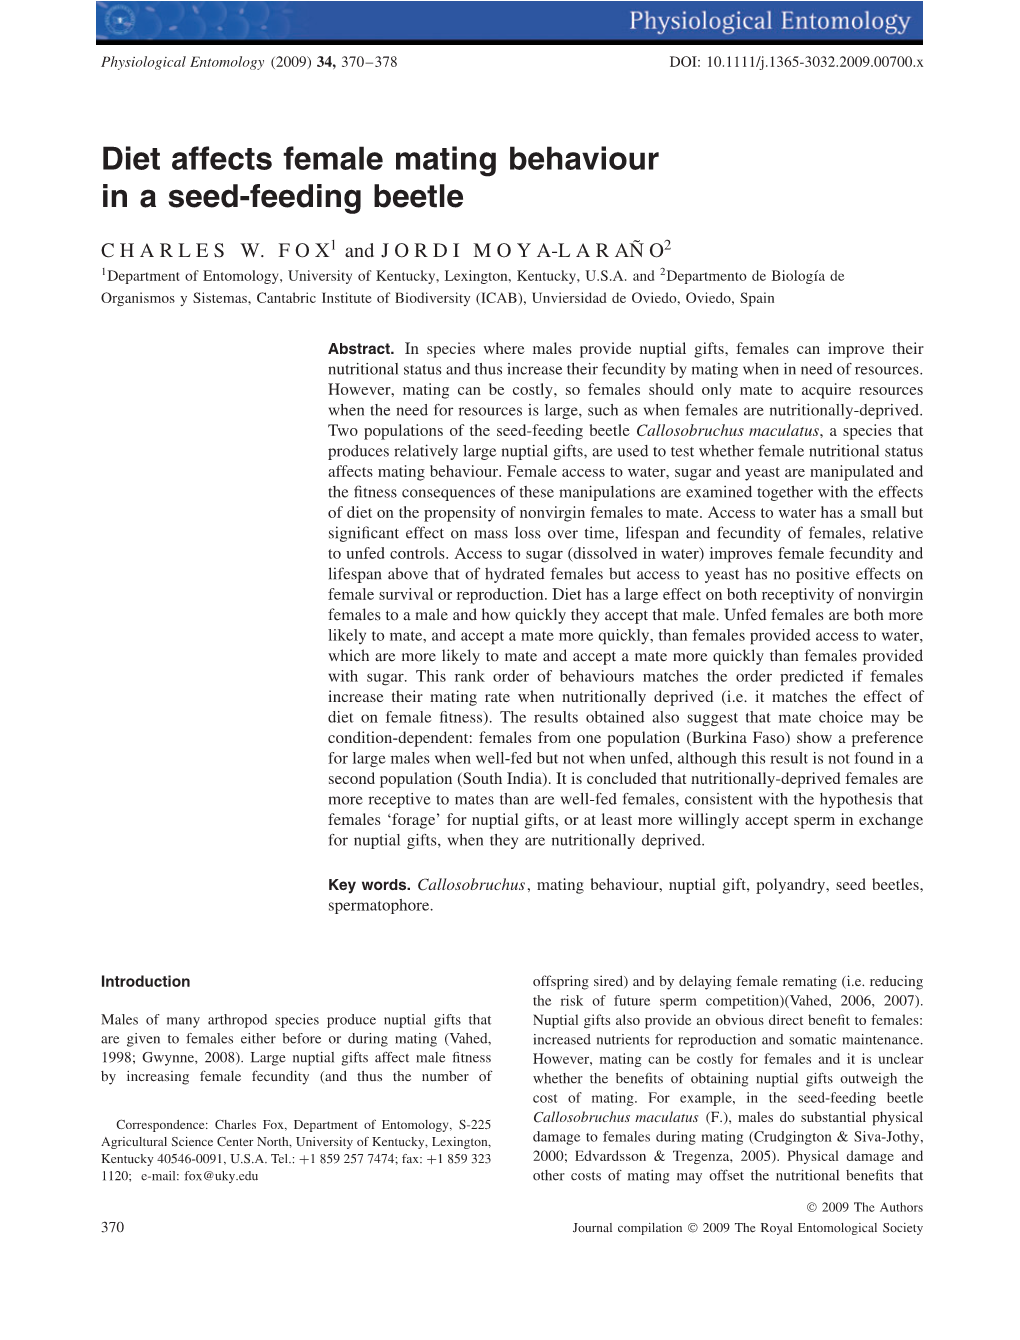 Diet Affects Female Mating Behaviour in a Seed-Feeding Beetle